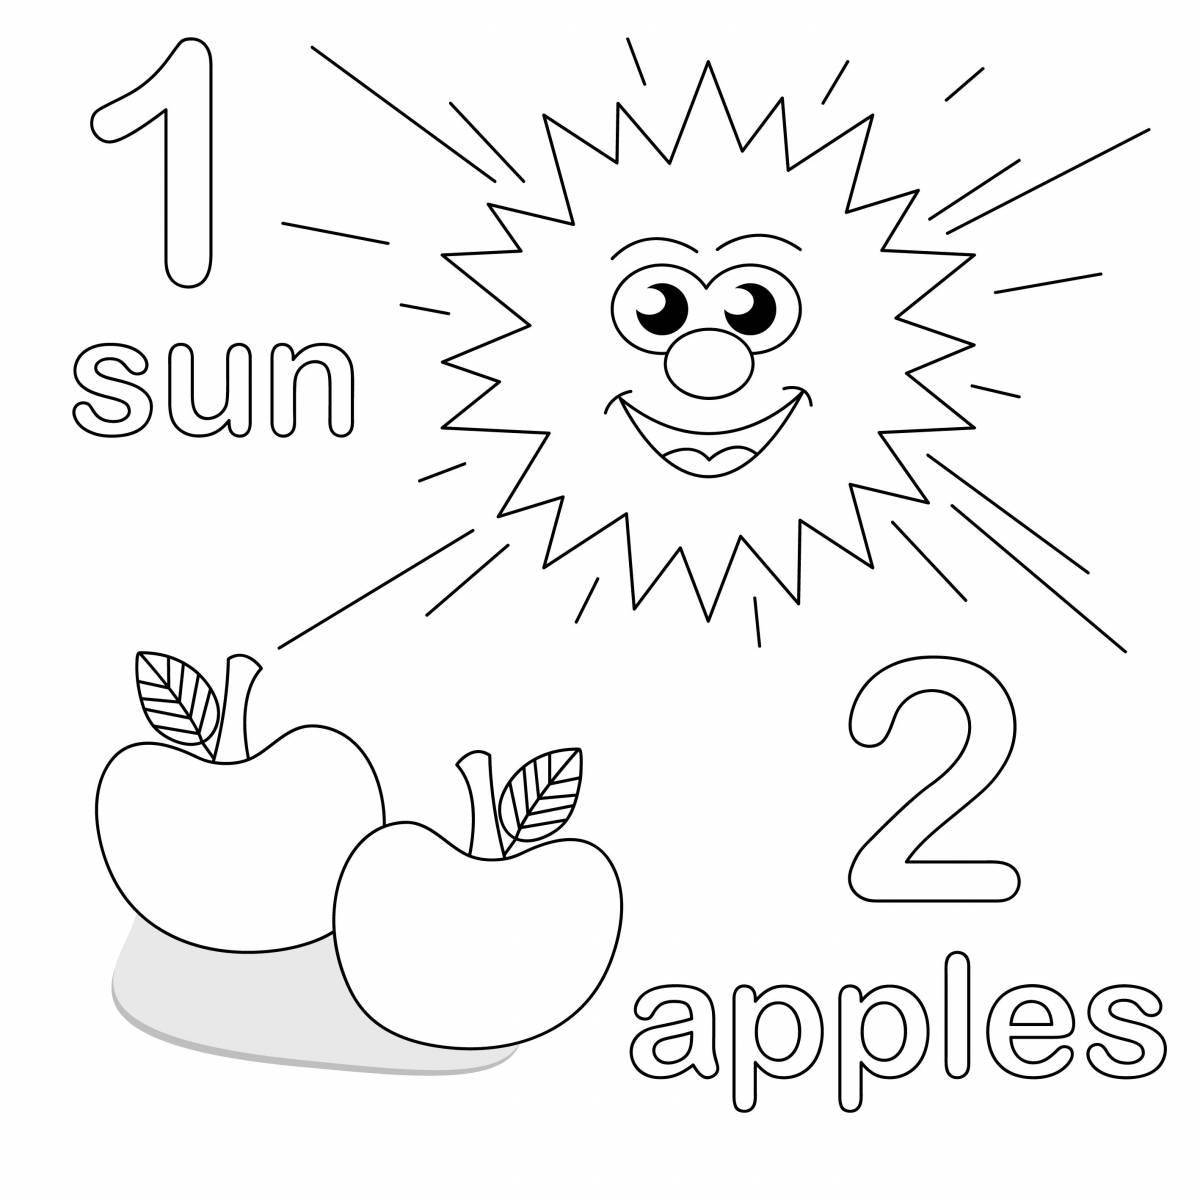 A fun coloring book with English numbers for kids